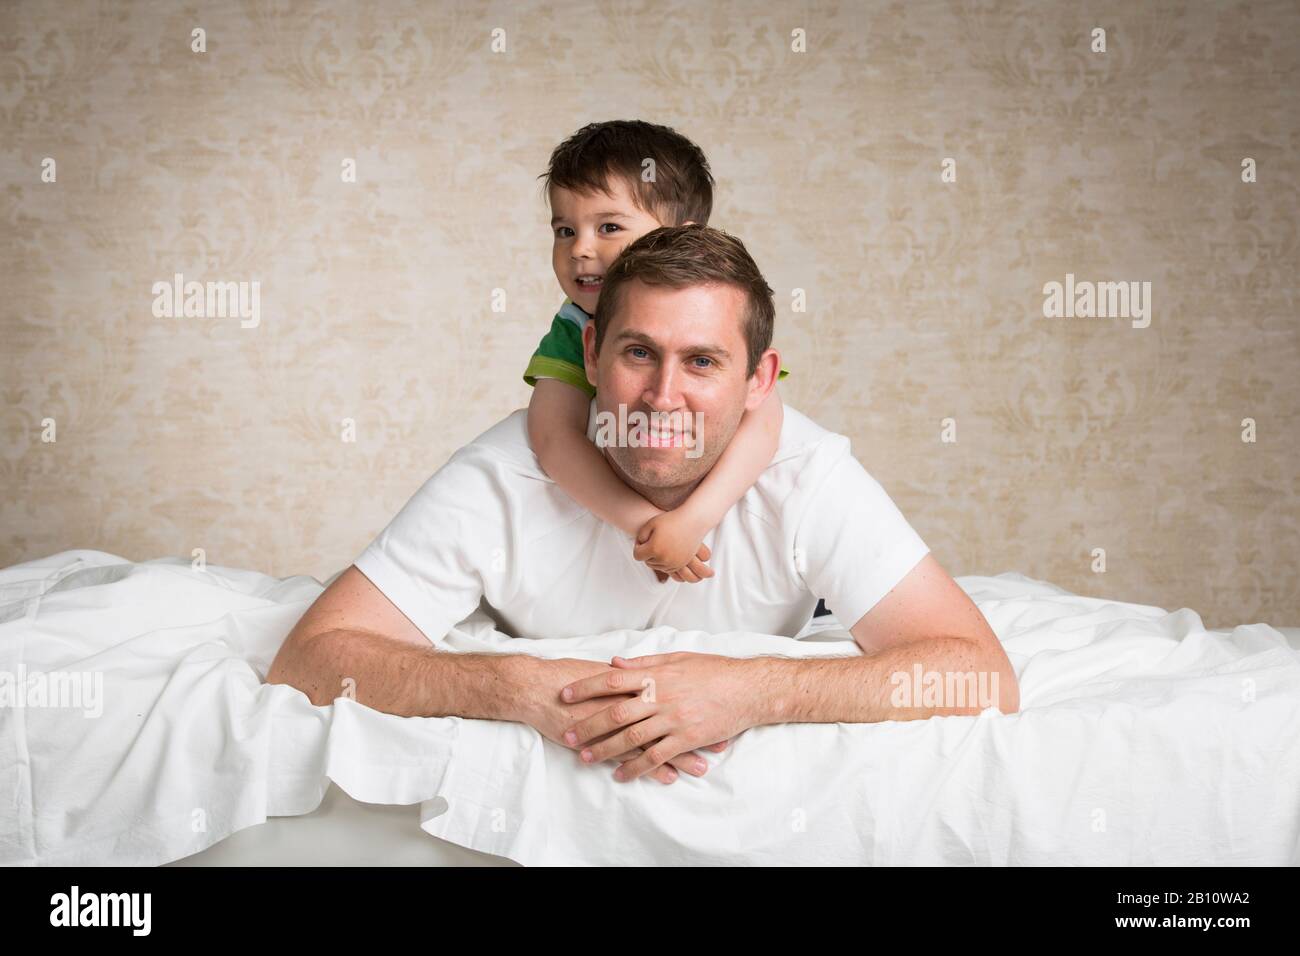 Father and son lie on a bed Stock Photo